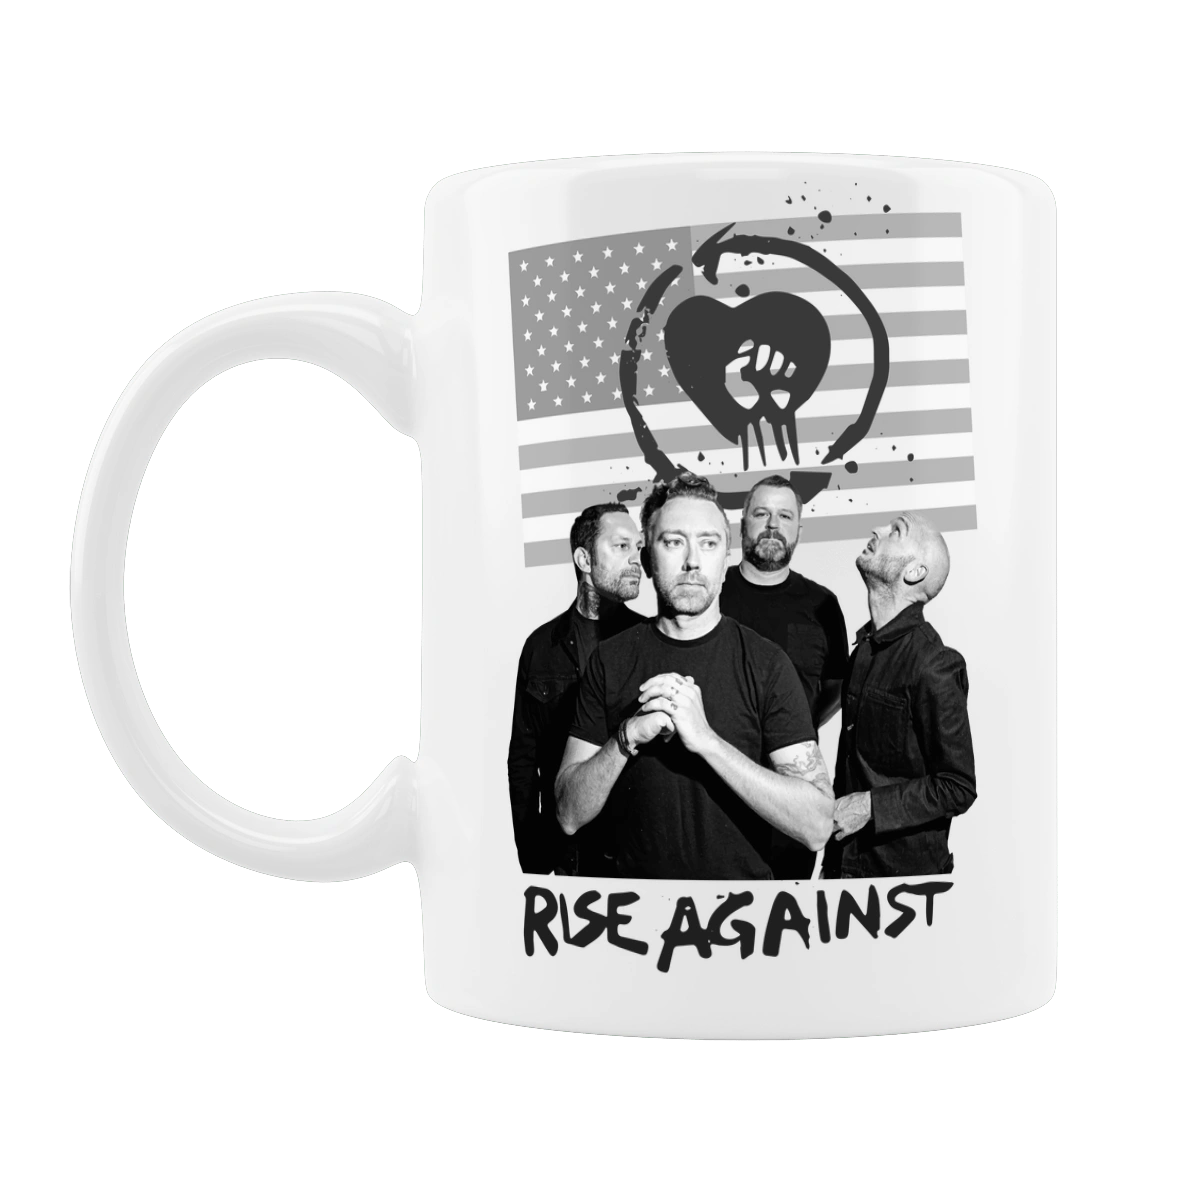 Rise Against. Real American punk rock